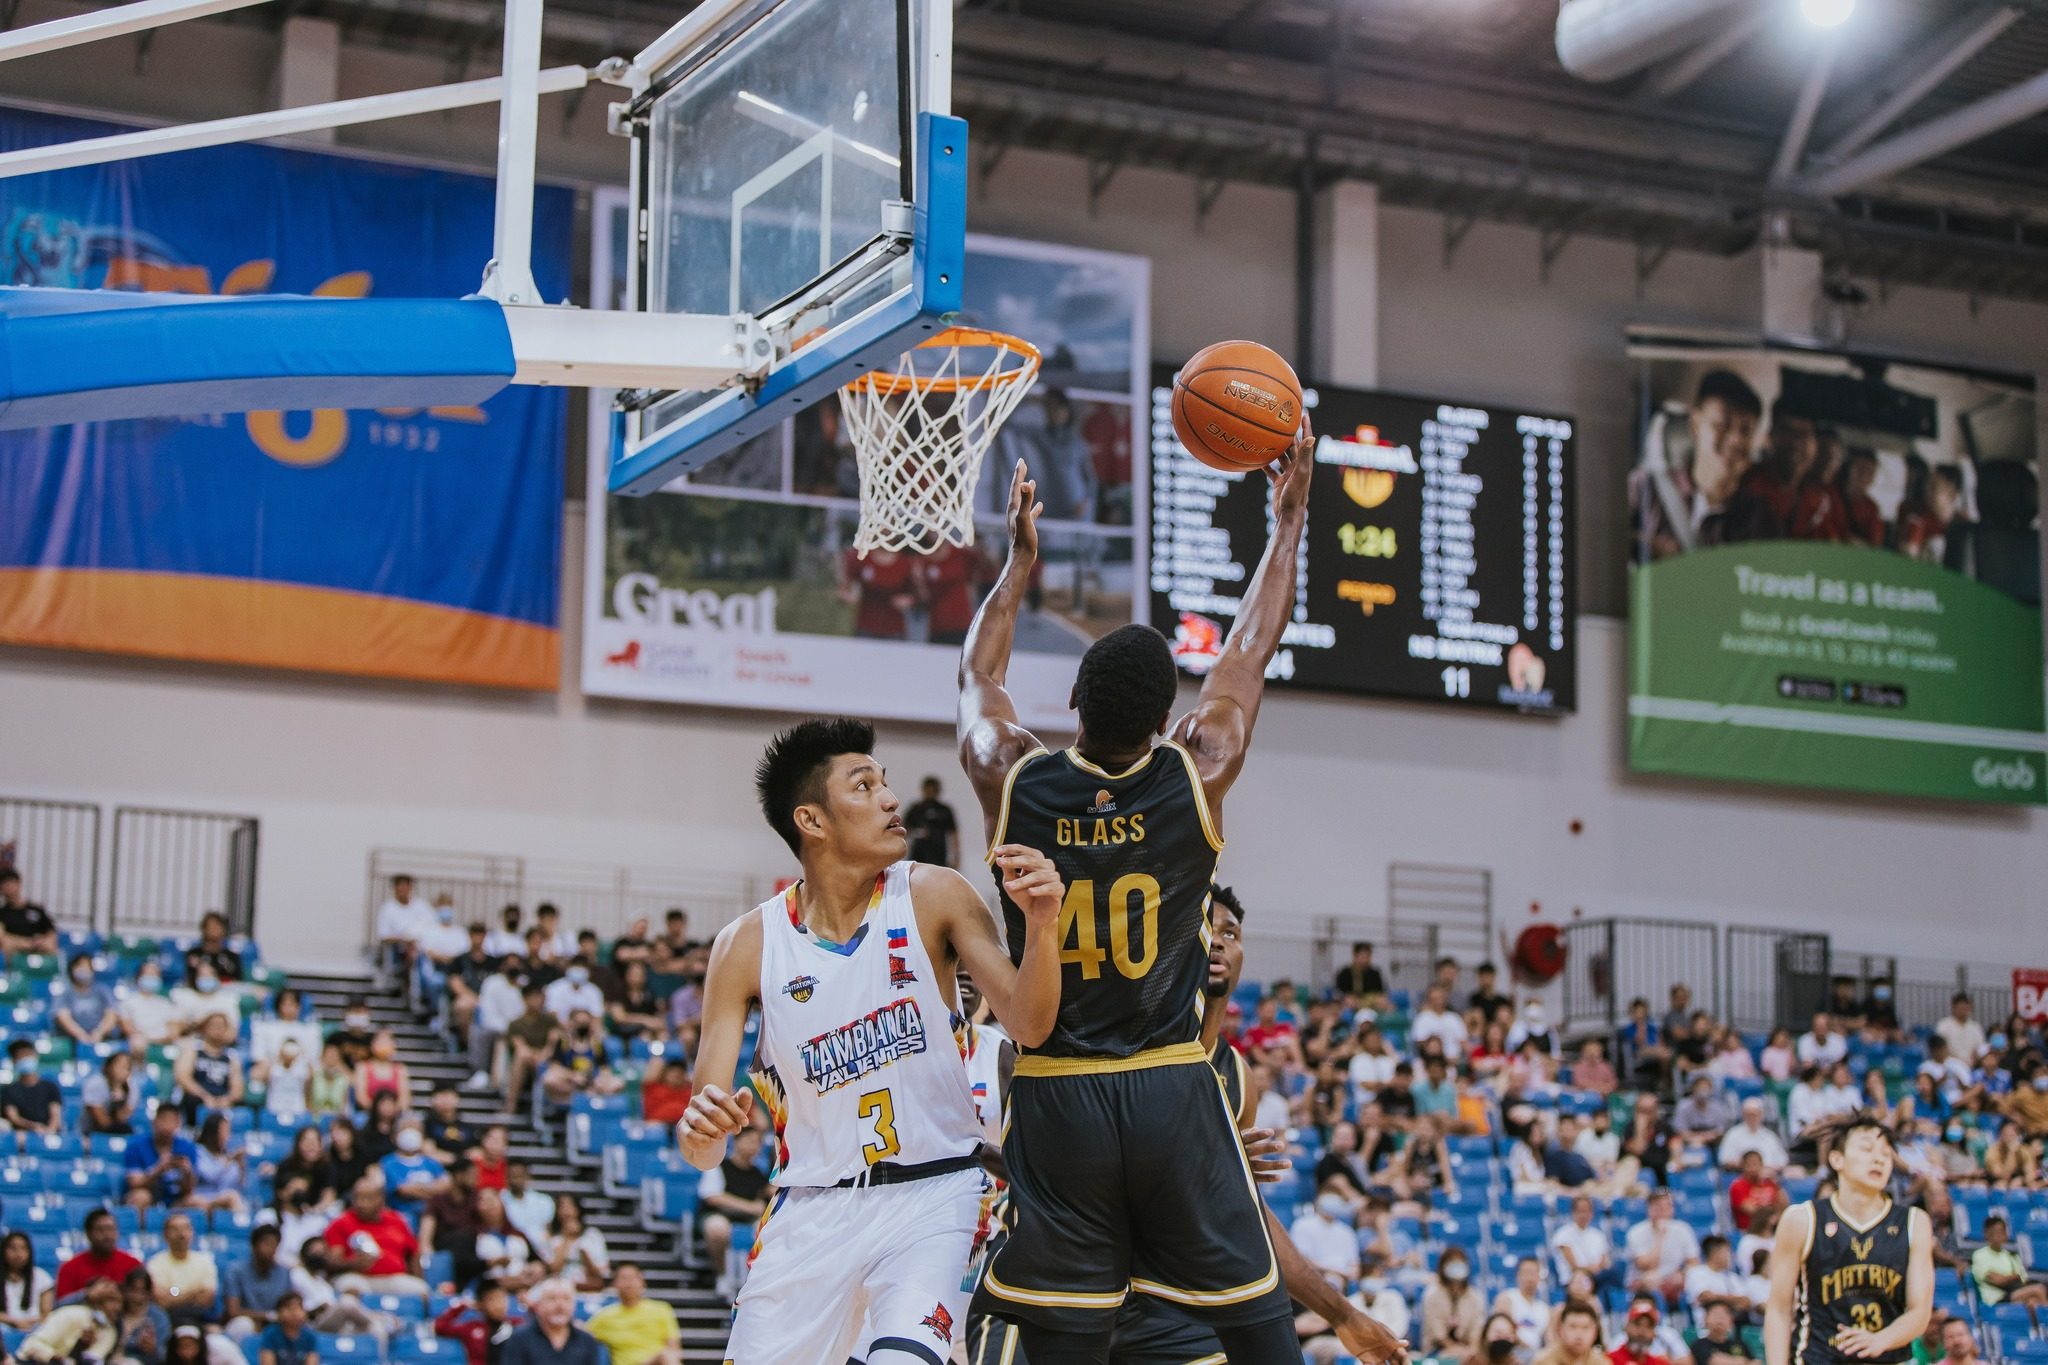 ABL: Zamboanga falters in clutch, wastes 15-point lead as Malaysia escapes